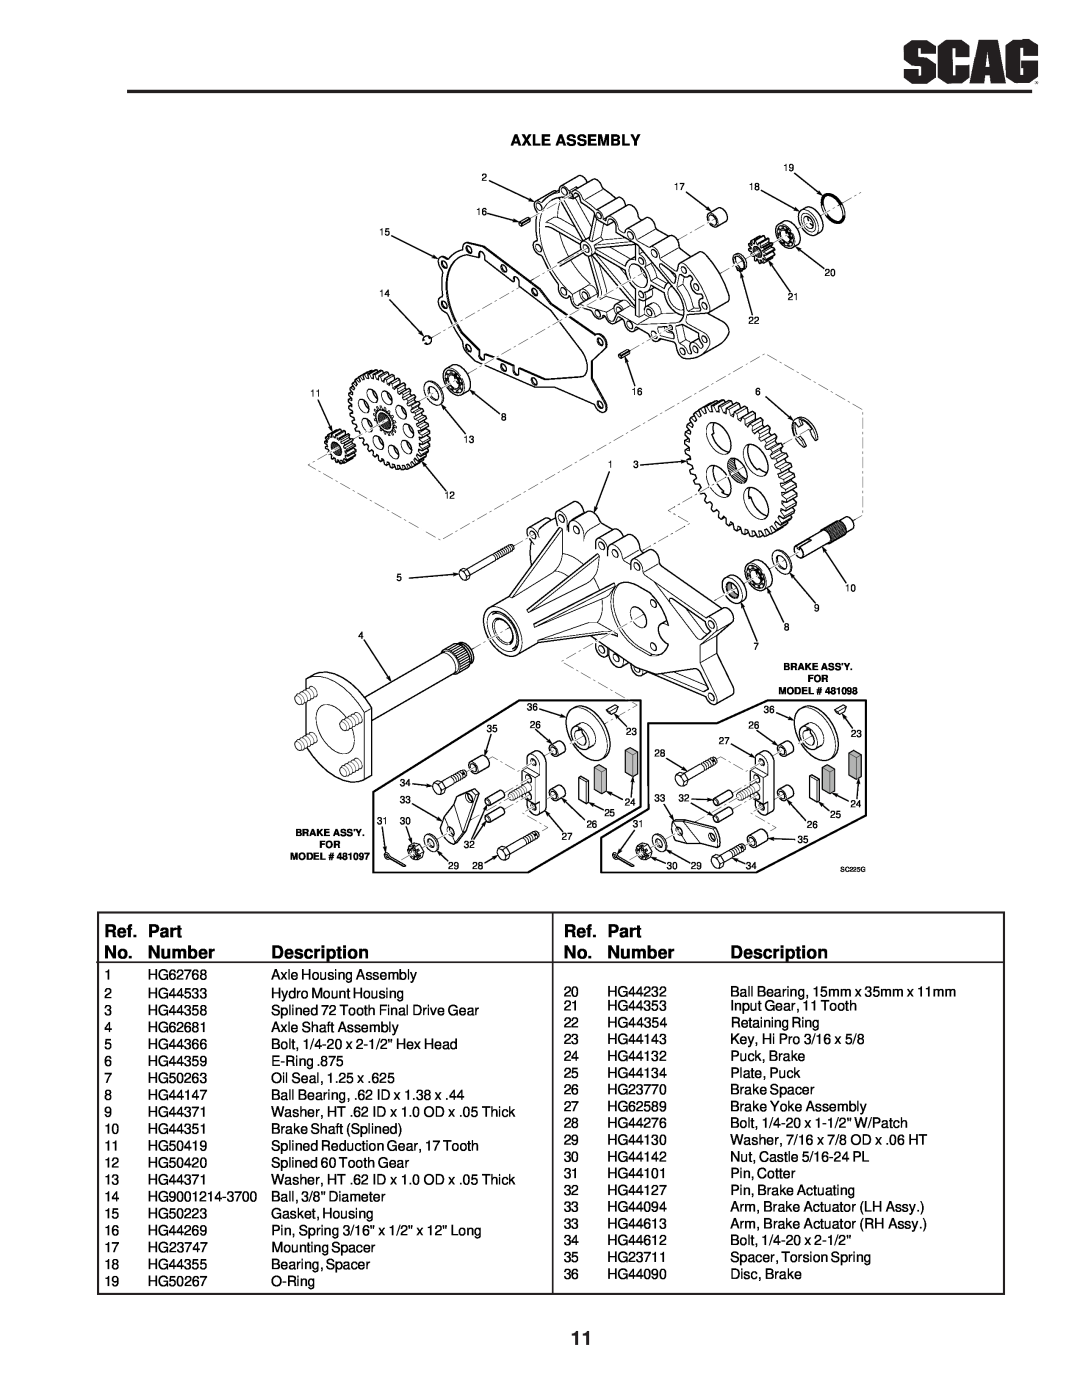 Scag Power Equipment SSZ operating instructions Axle Assembly, Brake Assy For Model # 